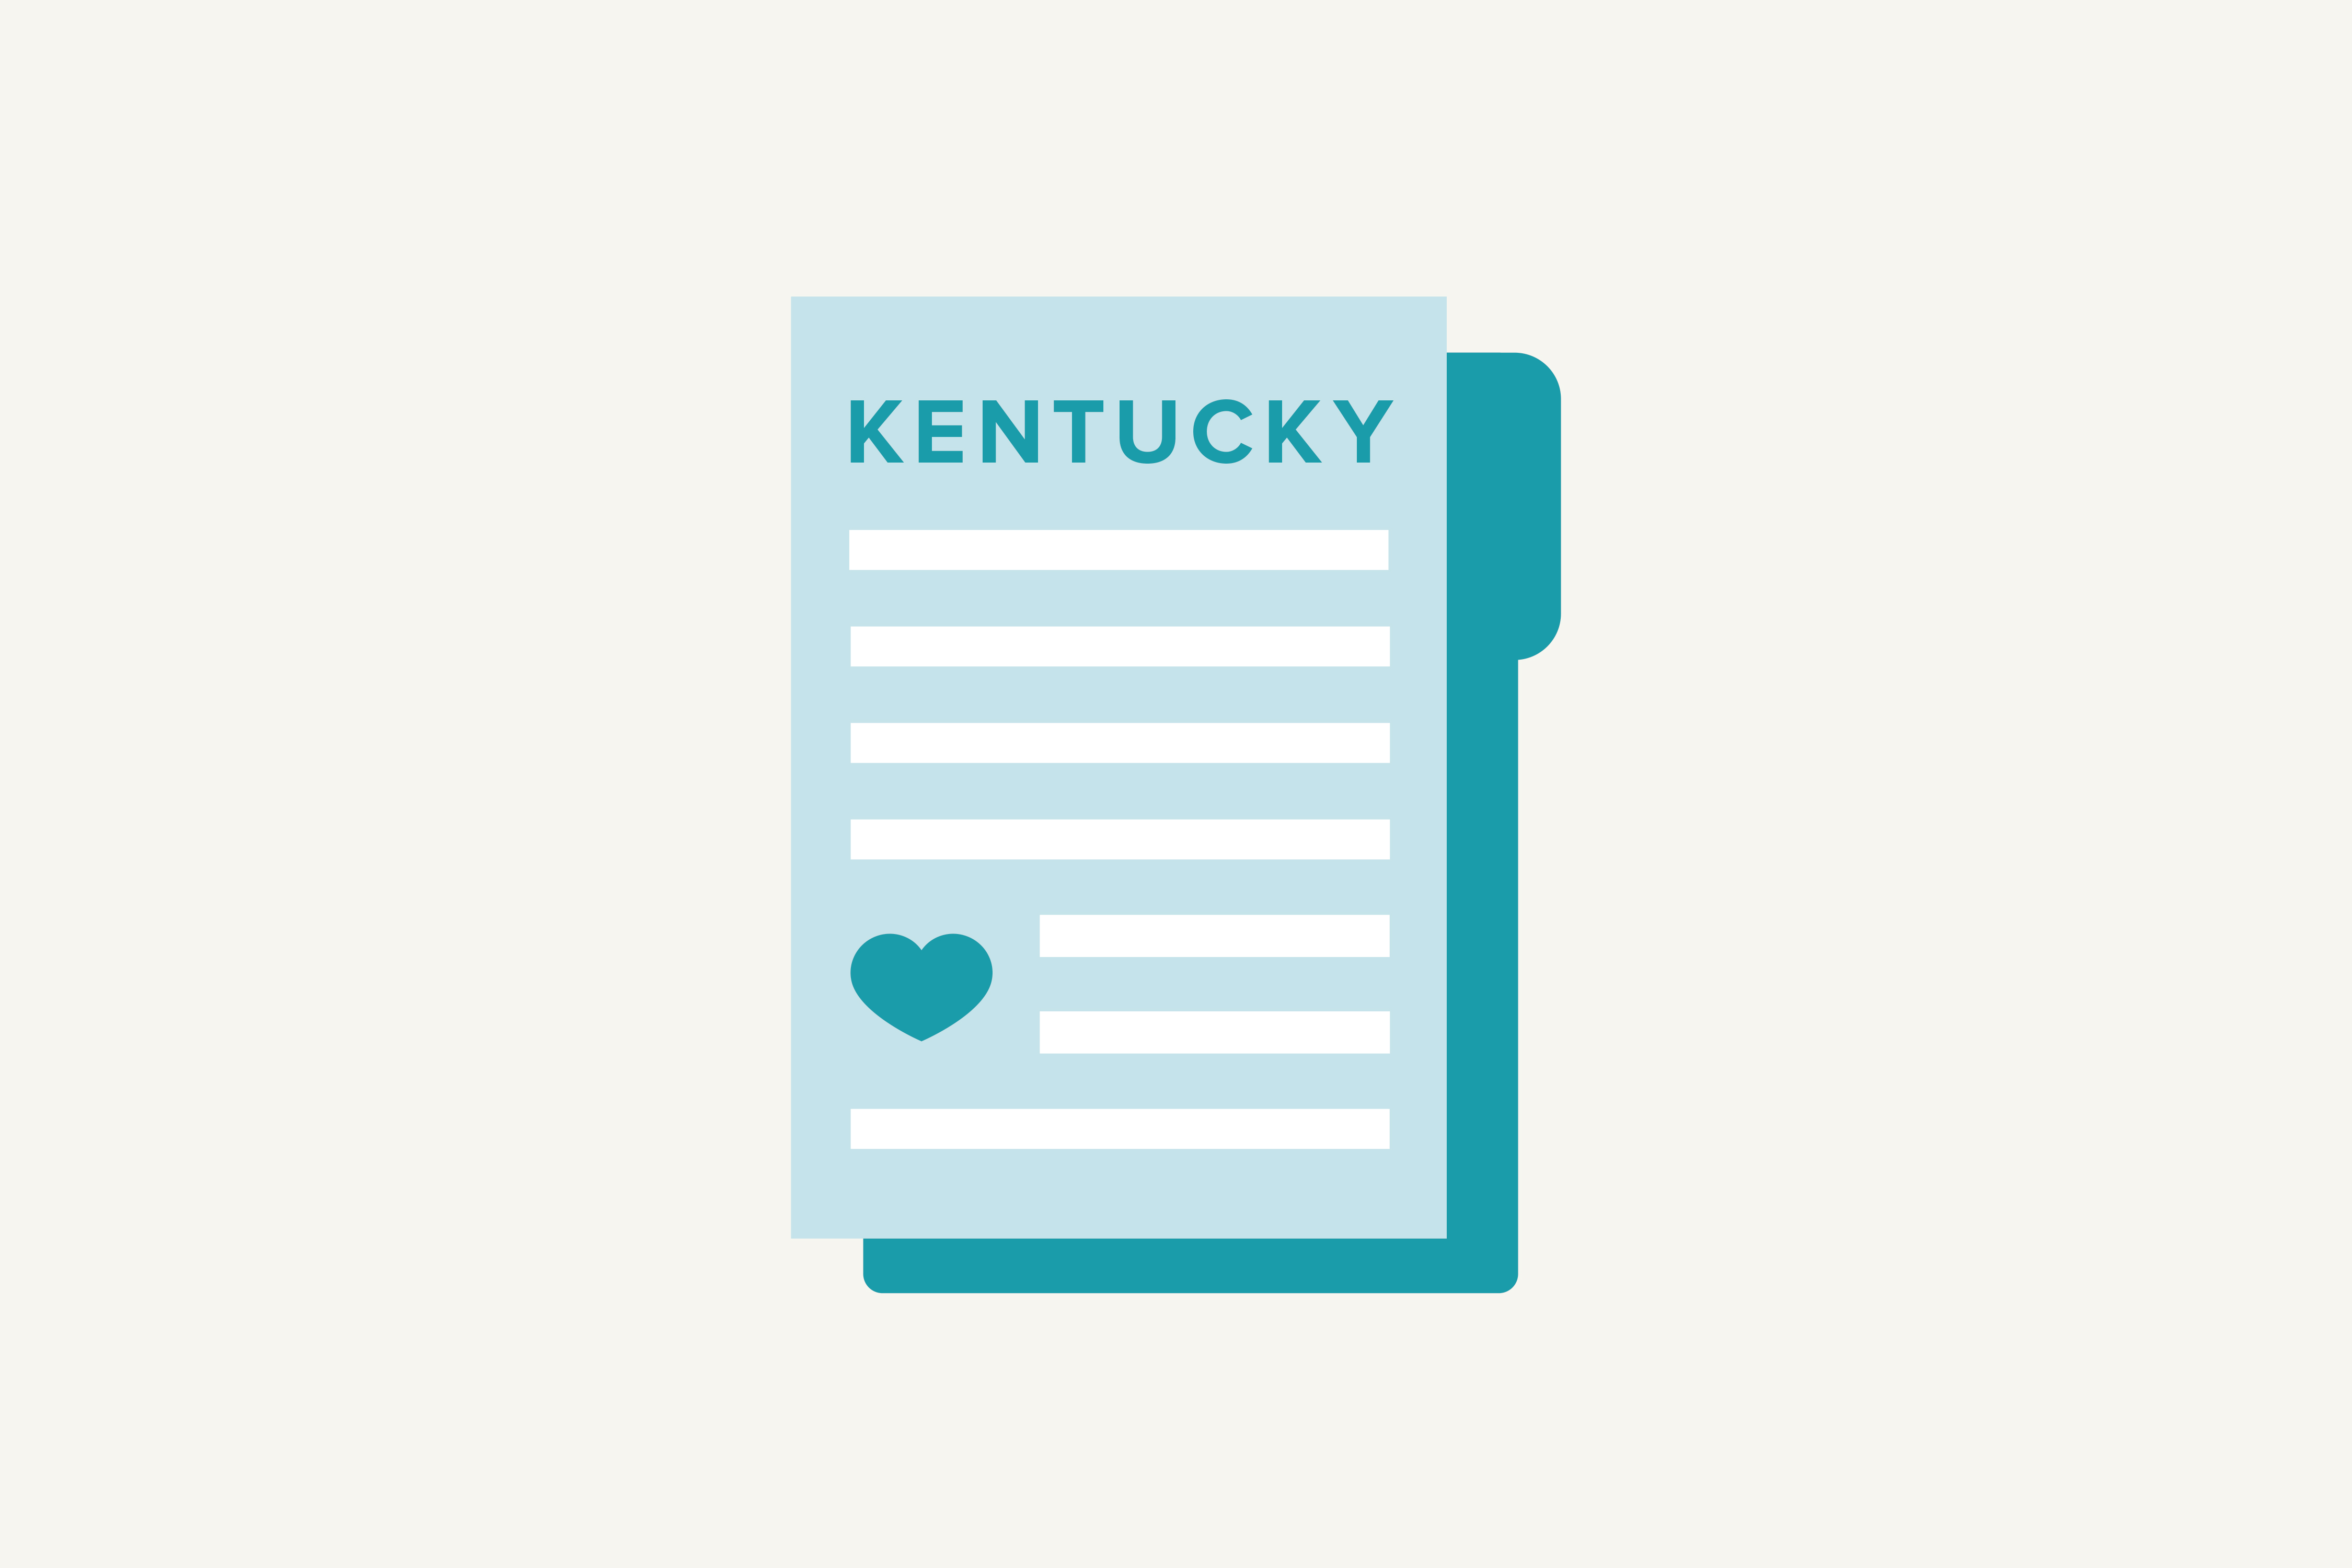 Kentucky Marriage Laws